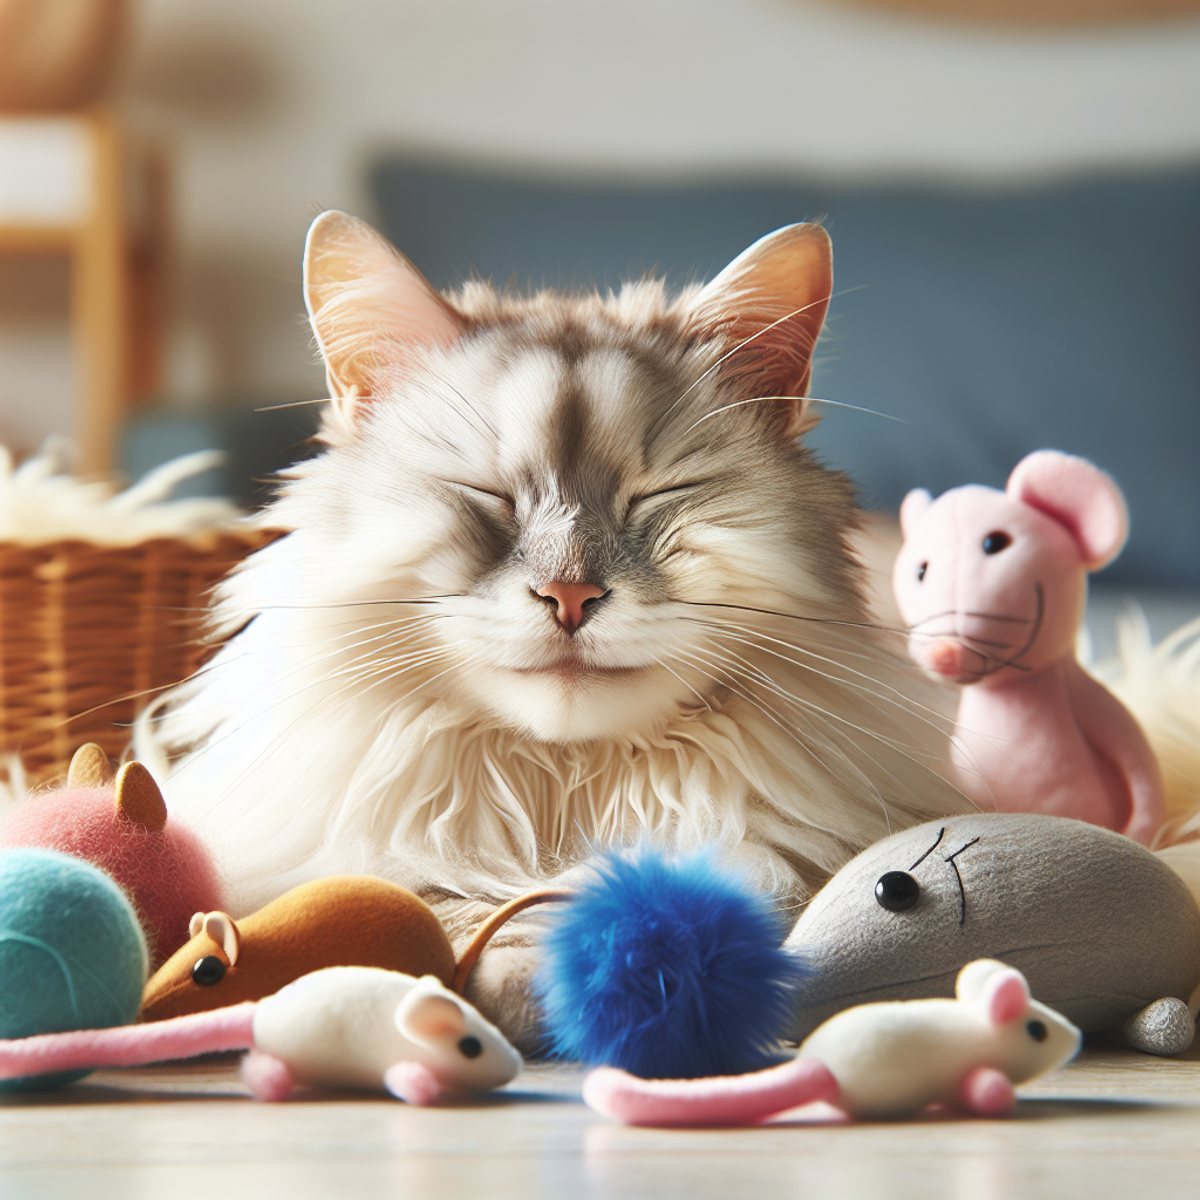 An elderly cat snuggled among plush mice, soft balls, and feather toys, looking content and relaxed.